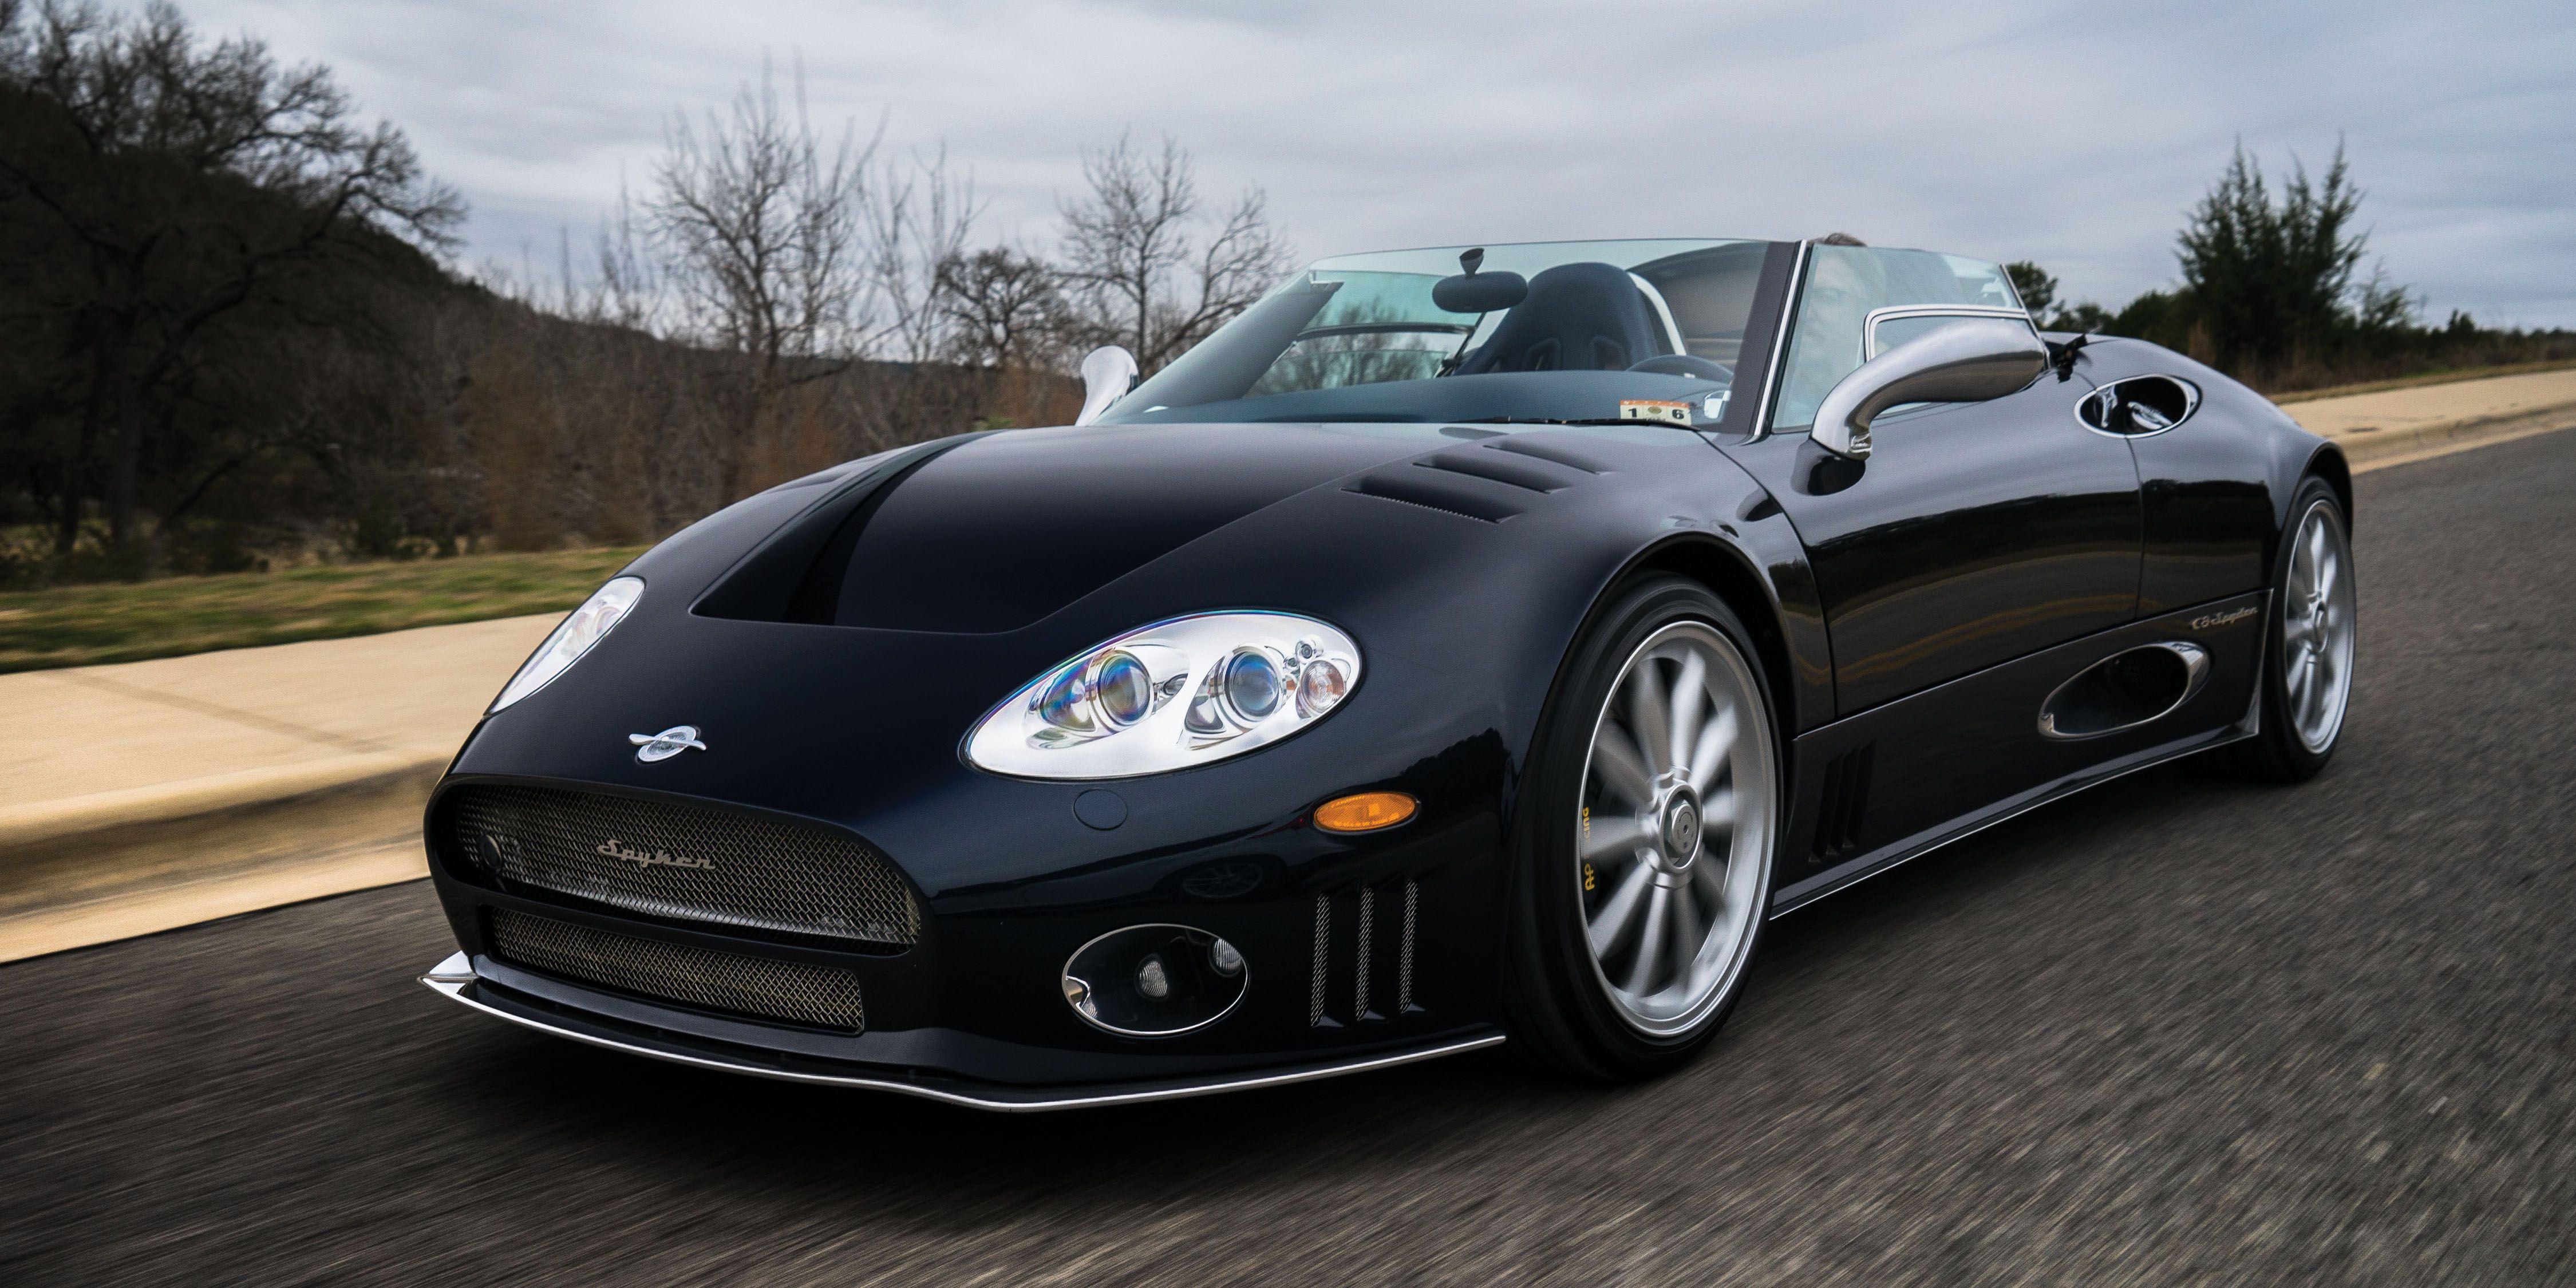 The 21 Greatest Convertible Supercars